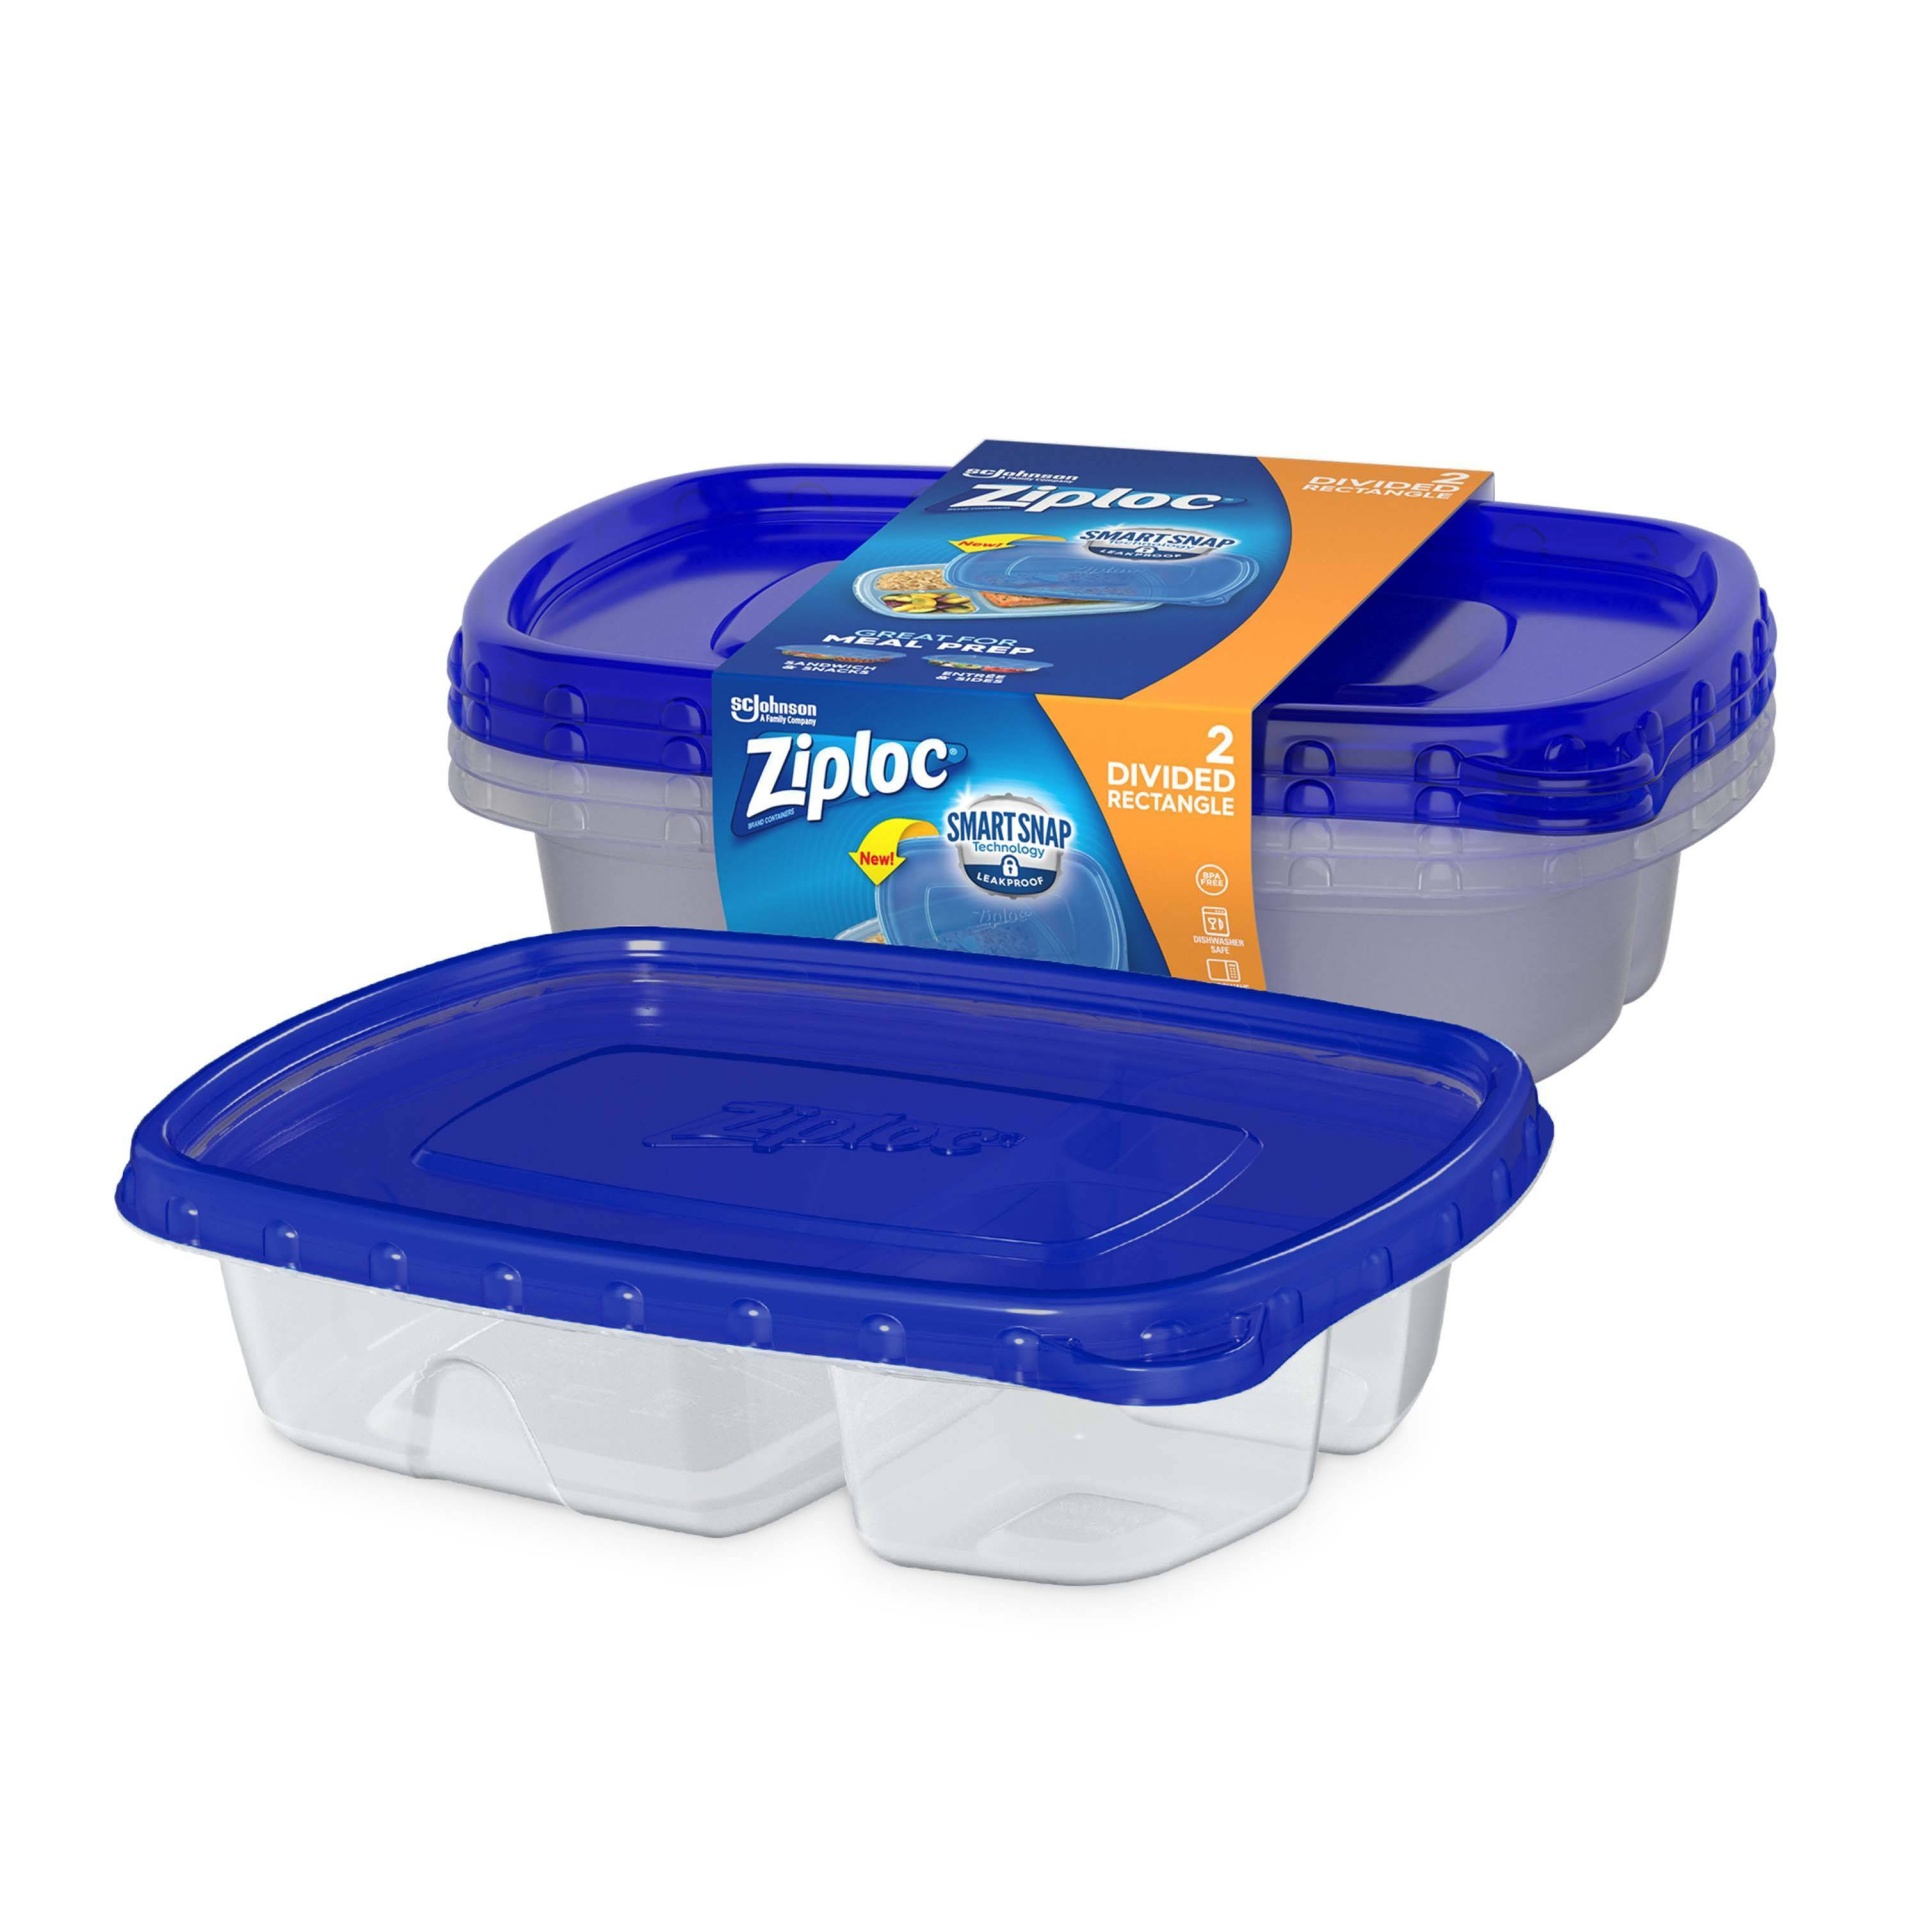 slide 1 of 12, Ziploc Divided Rectangle Containers with Smart Snap Technology, 2 ct